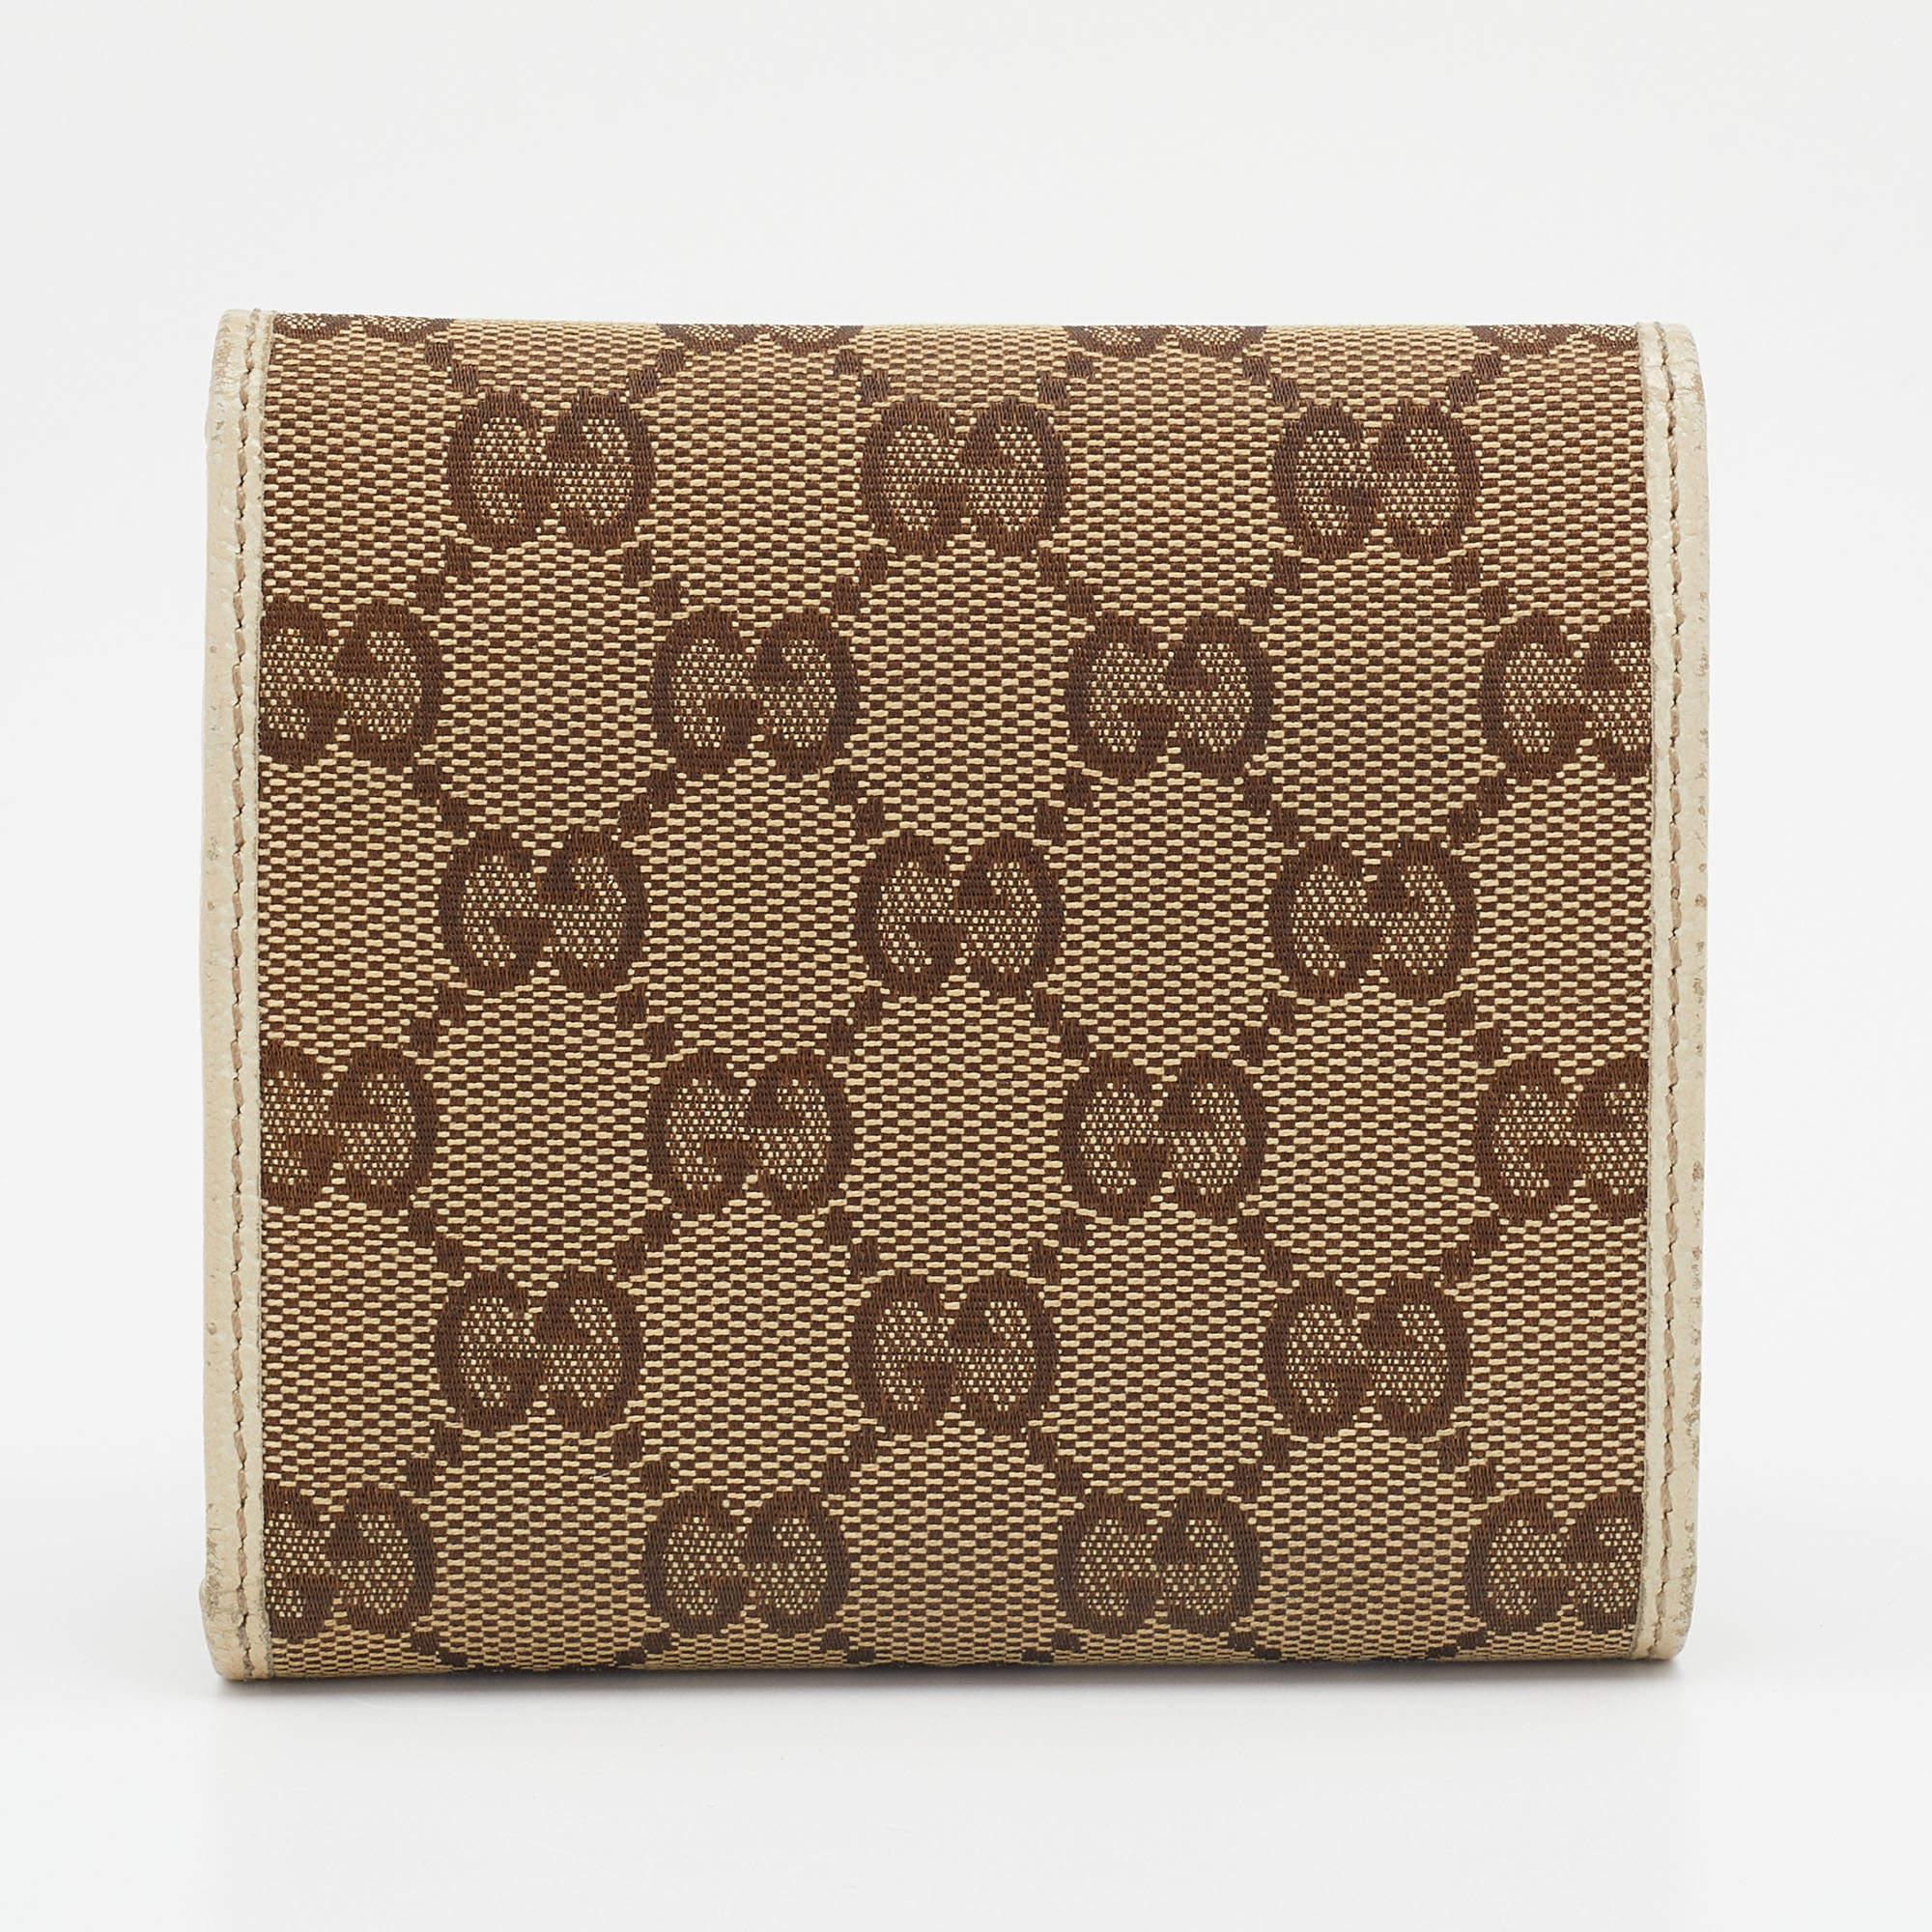 Crafted from GG canvas and leather, this Princy trifold wallet from Gucci has an eye-catching style. It is designed to neatly house all the things you need and also to deliver an instantly-recognizable look of luxury.

